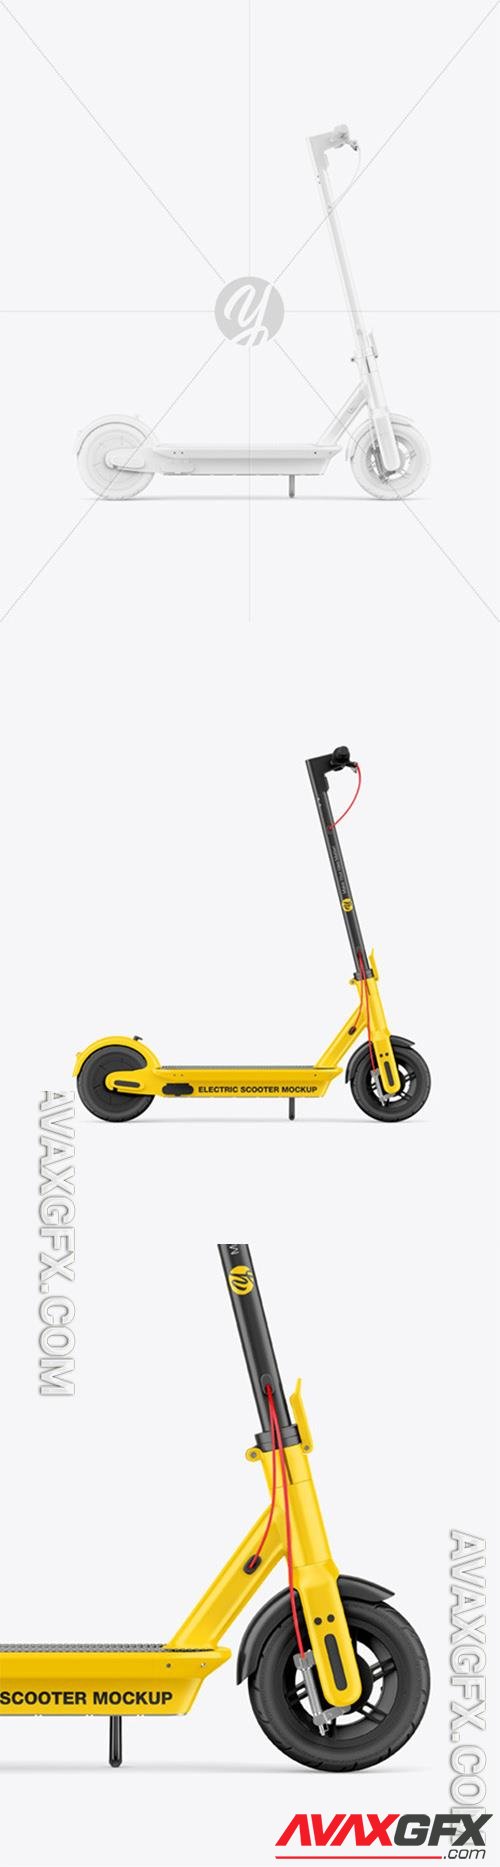 Electric Scooter Mockup - Side View 86300 TIF